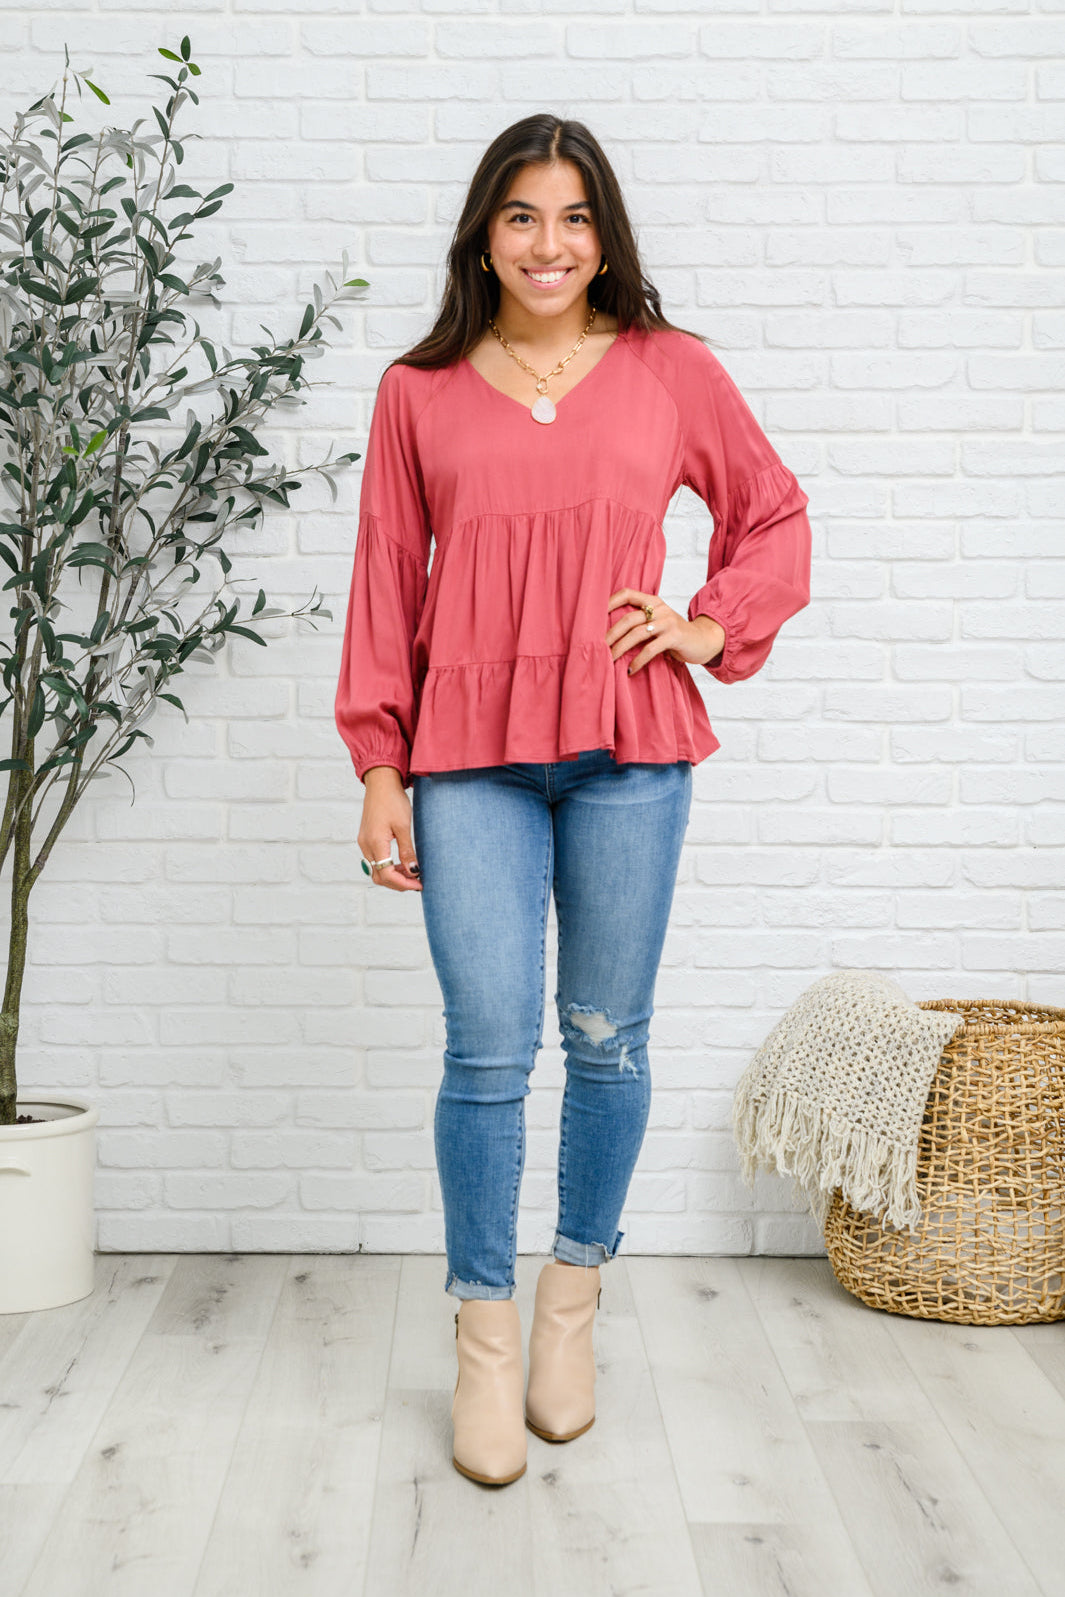 Sassy Swing Tiered Top Ave Shops